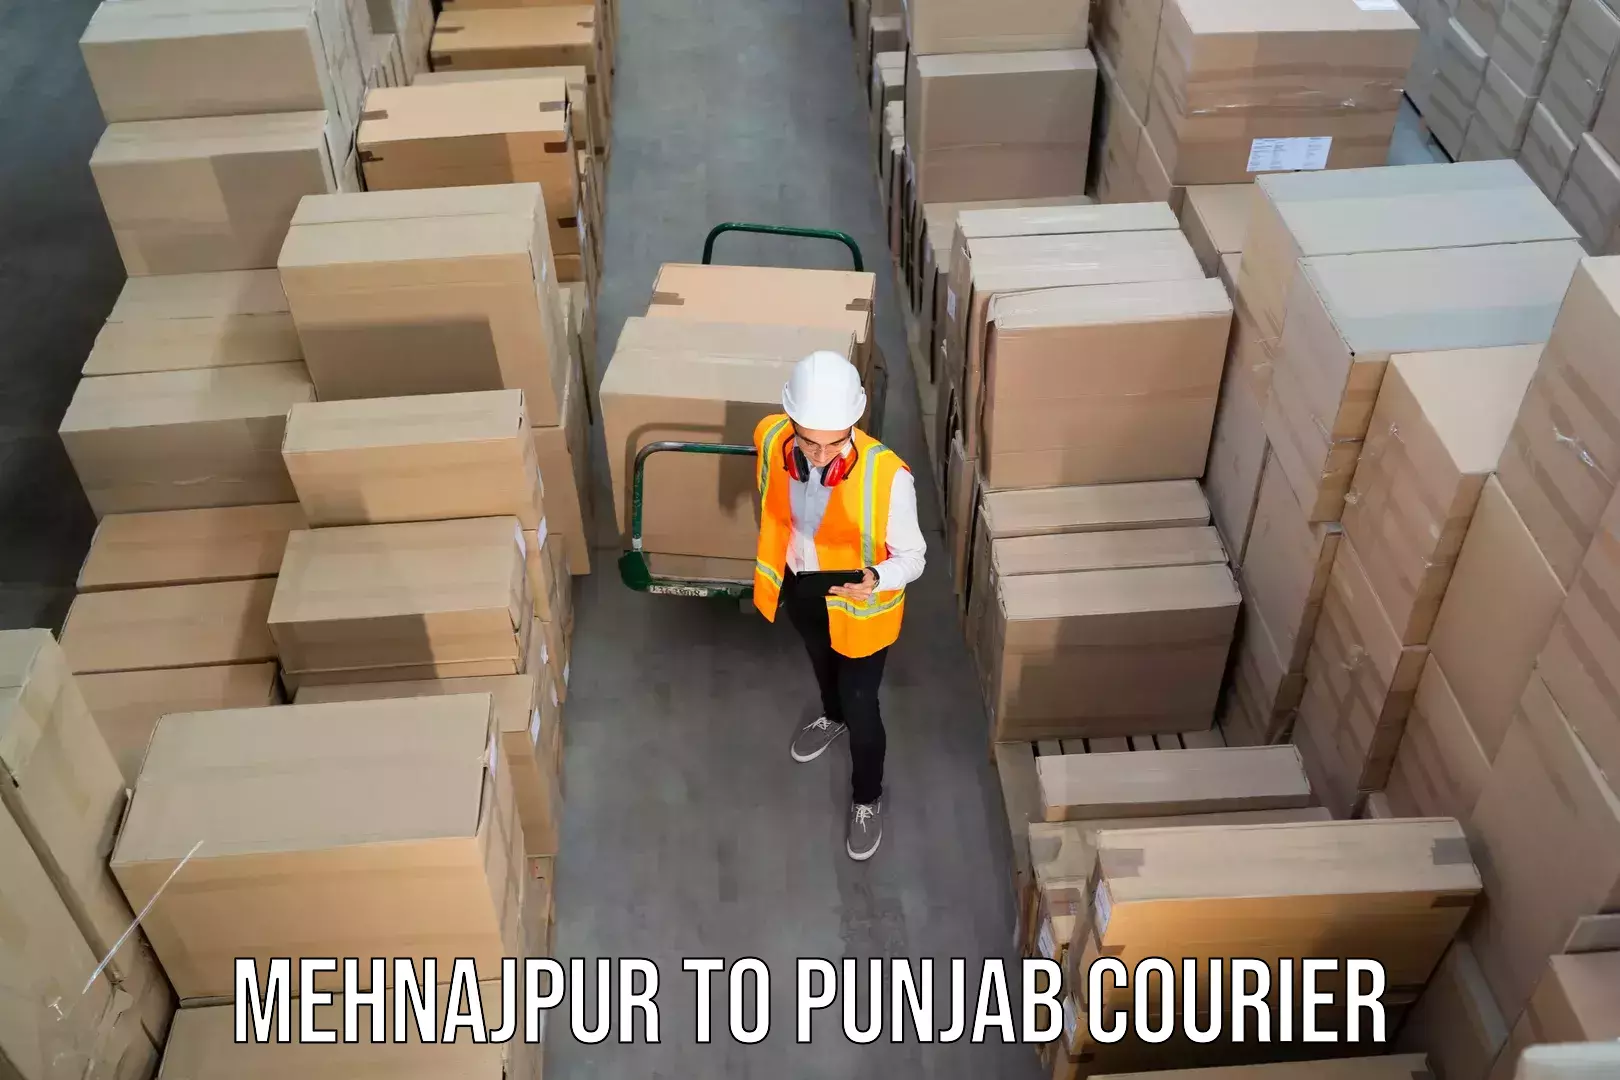 Streamlined delivery processes Mehnajpur to Mohali